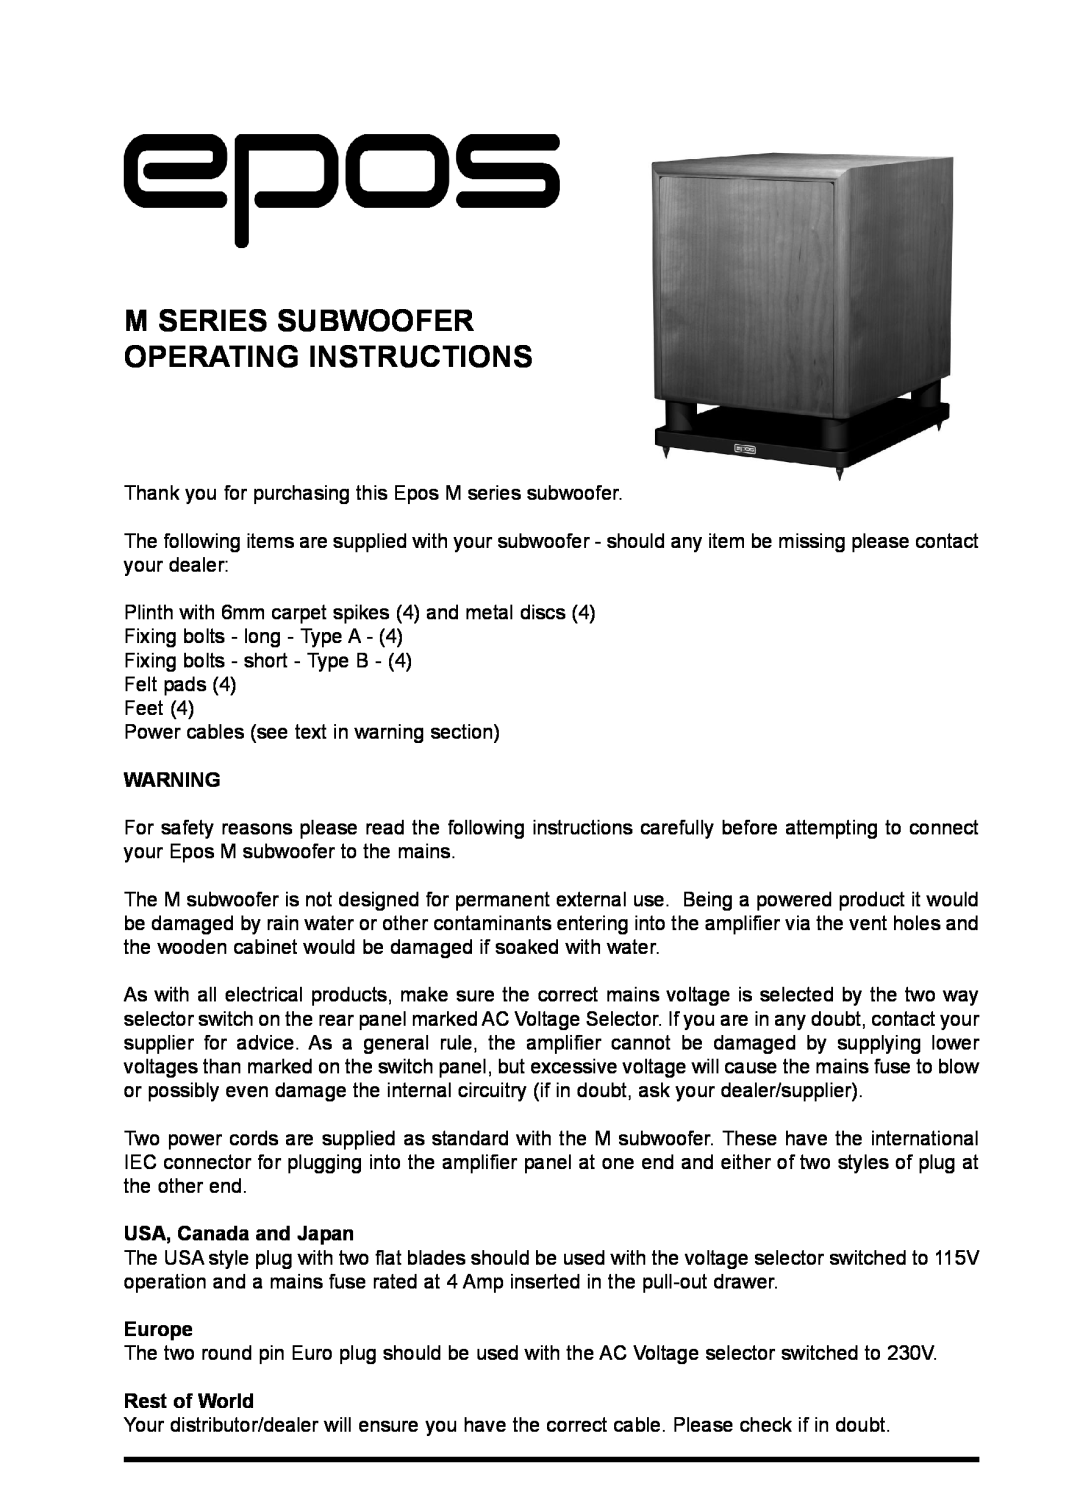 EPOS manual M Series Subwoofer Operating Instructions, USA, Canada and Japan, Europe, Rest of World 